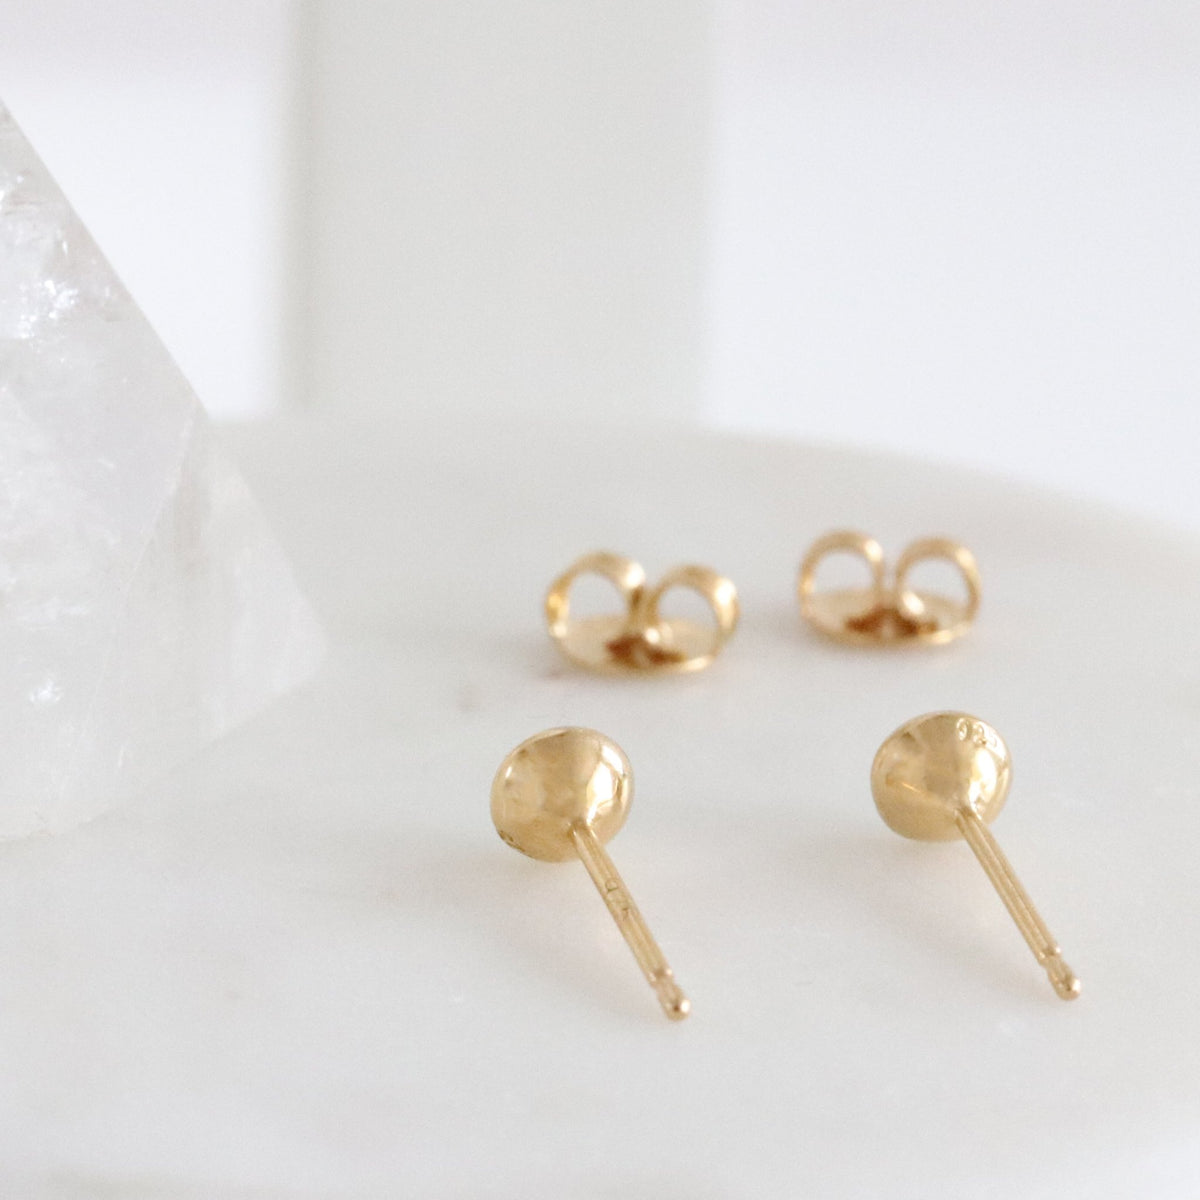 TINY PROTECT STUD EARRINGS - CHRYSOPRASE &amp; GOLD - SO PRETTY CARA COTTER